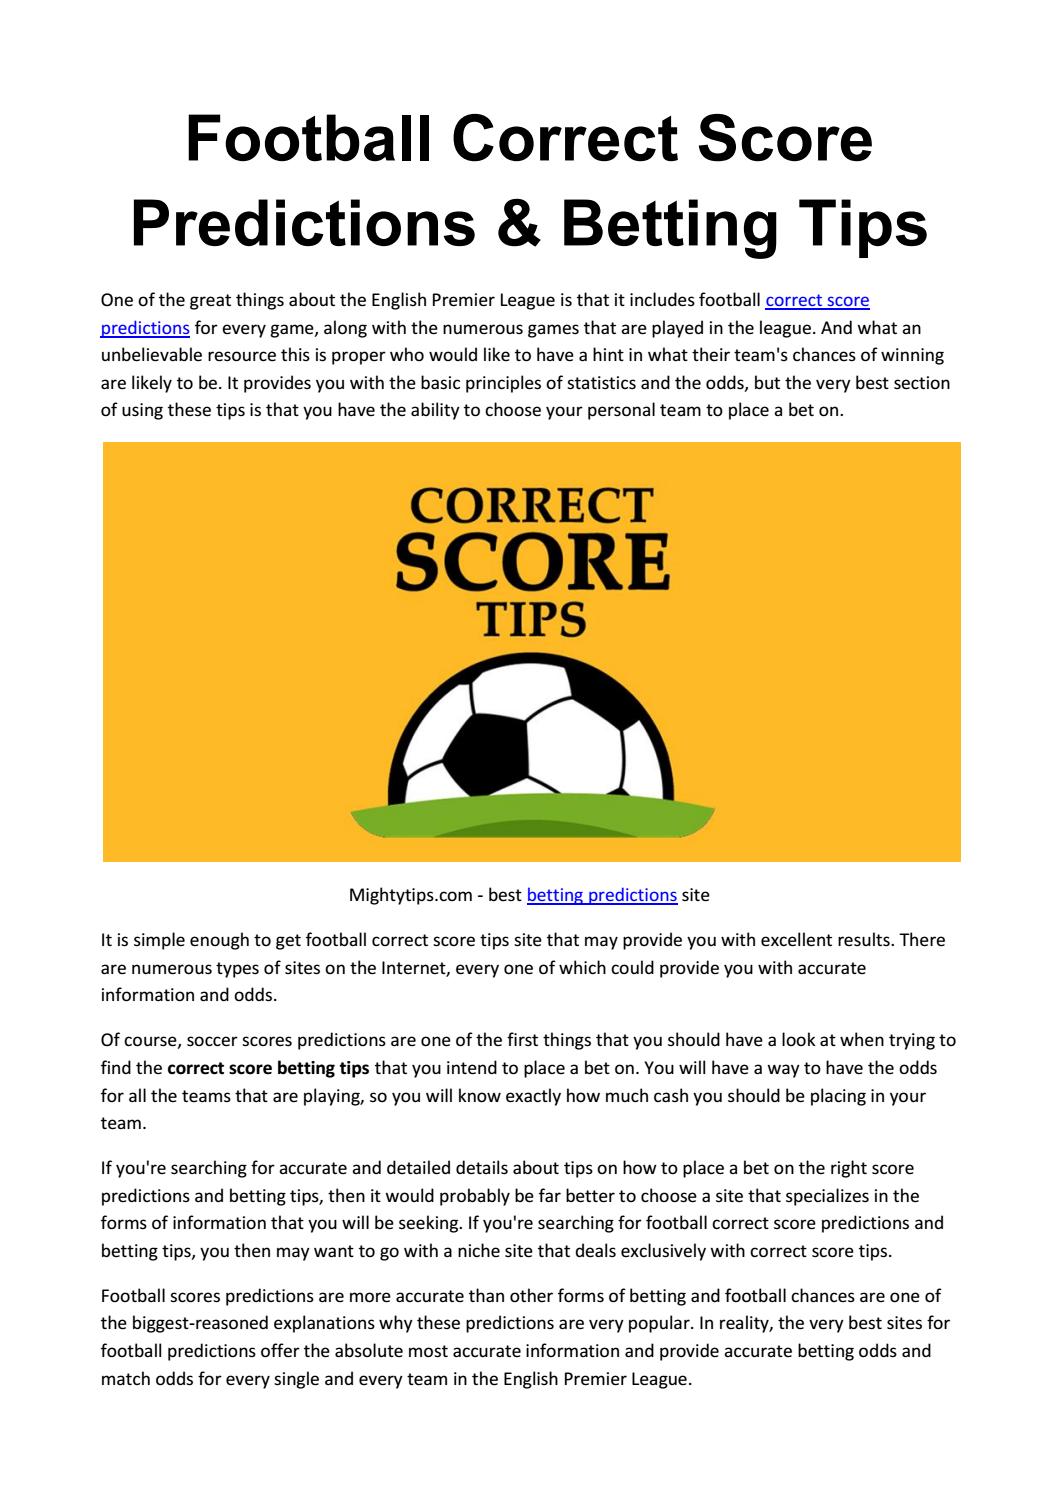 Sites that predict football matches